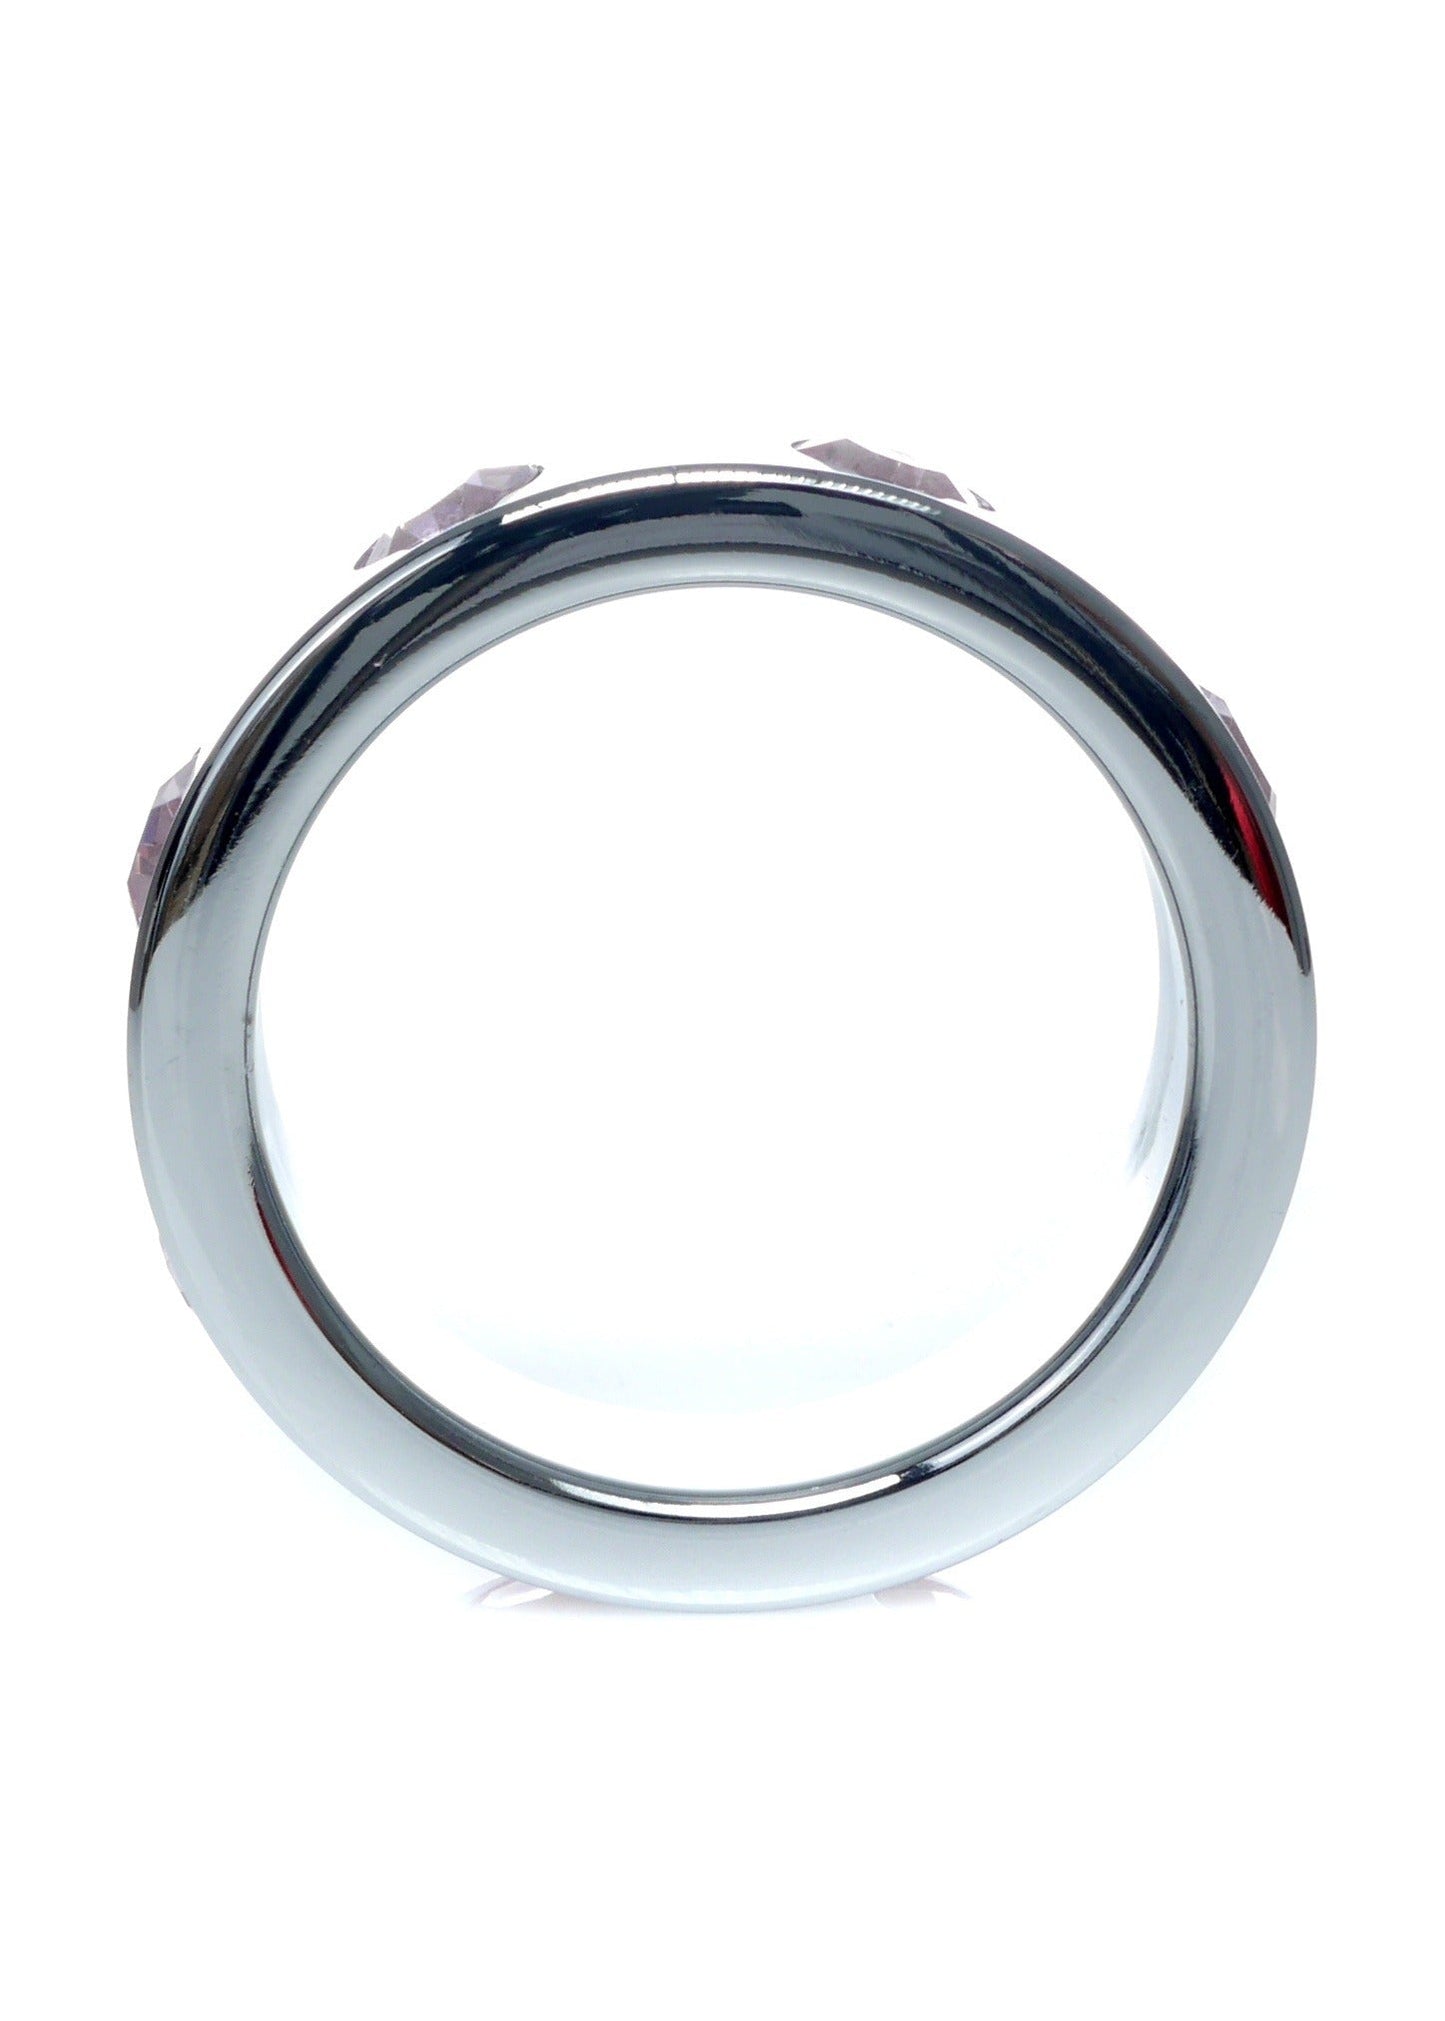 Bossoftoys - 64-00122 - Stainless steel - Metal Cockring - with rose Diamond stones - Large size - inner dia 4,5 CM - outer dia 5,5 CM